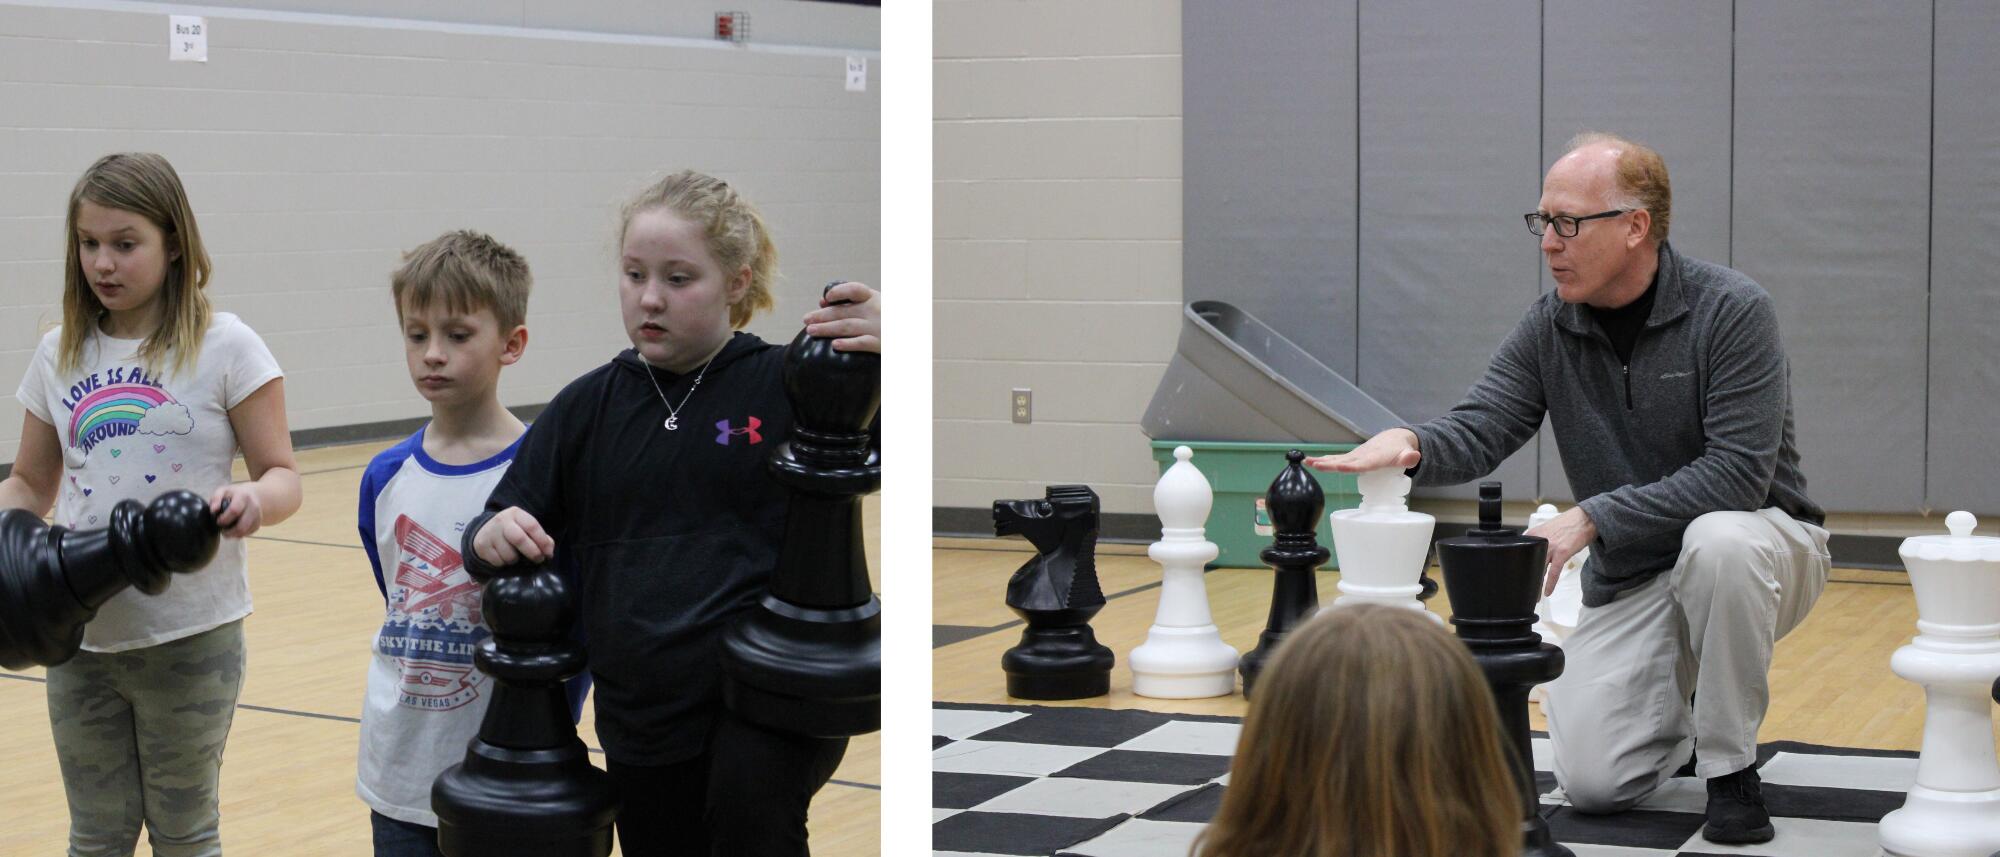 Students listening to "The Chess Guy" Todd Wolf explaining the basic rules of playing chess.